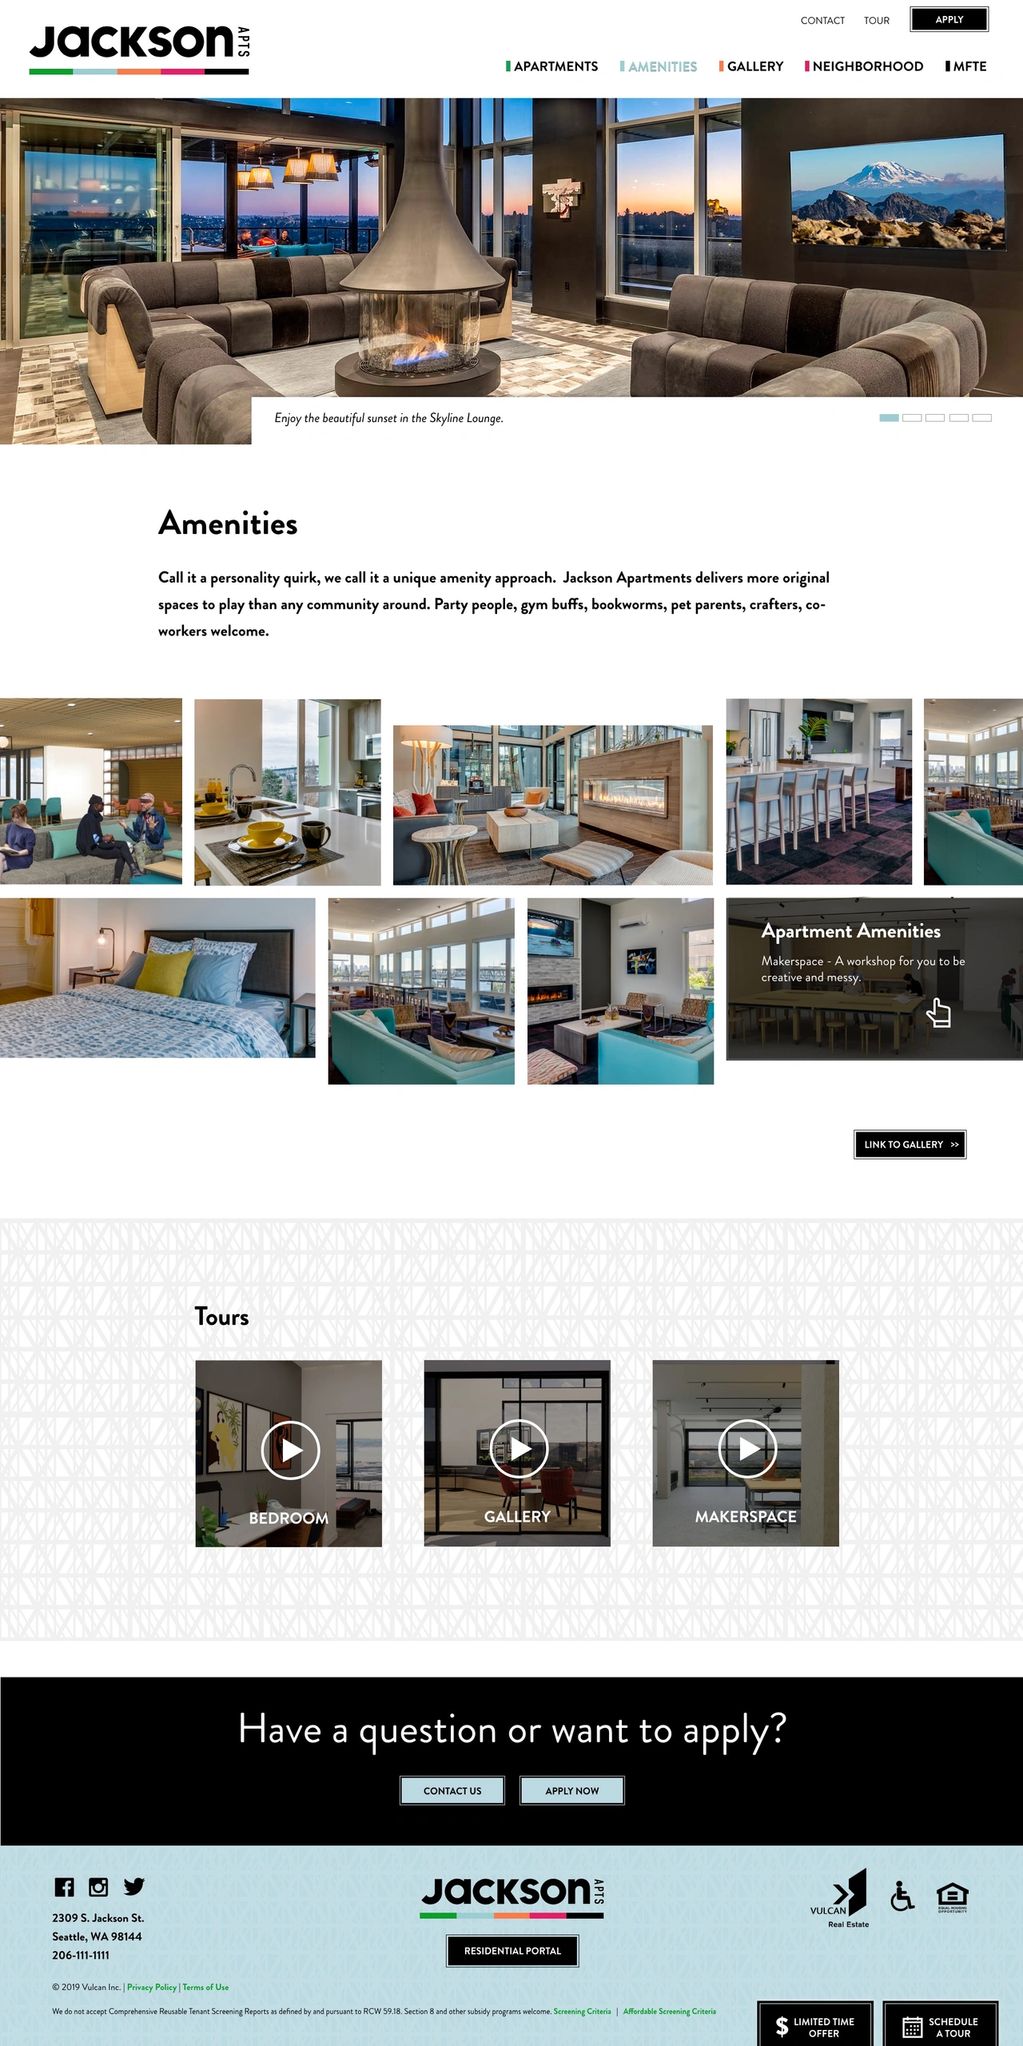 Shows amenities photos inside Jackson apartment. There is an infinite scrolling image gallery.